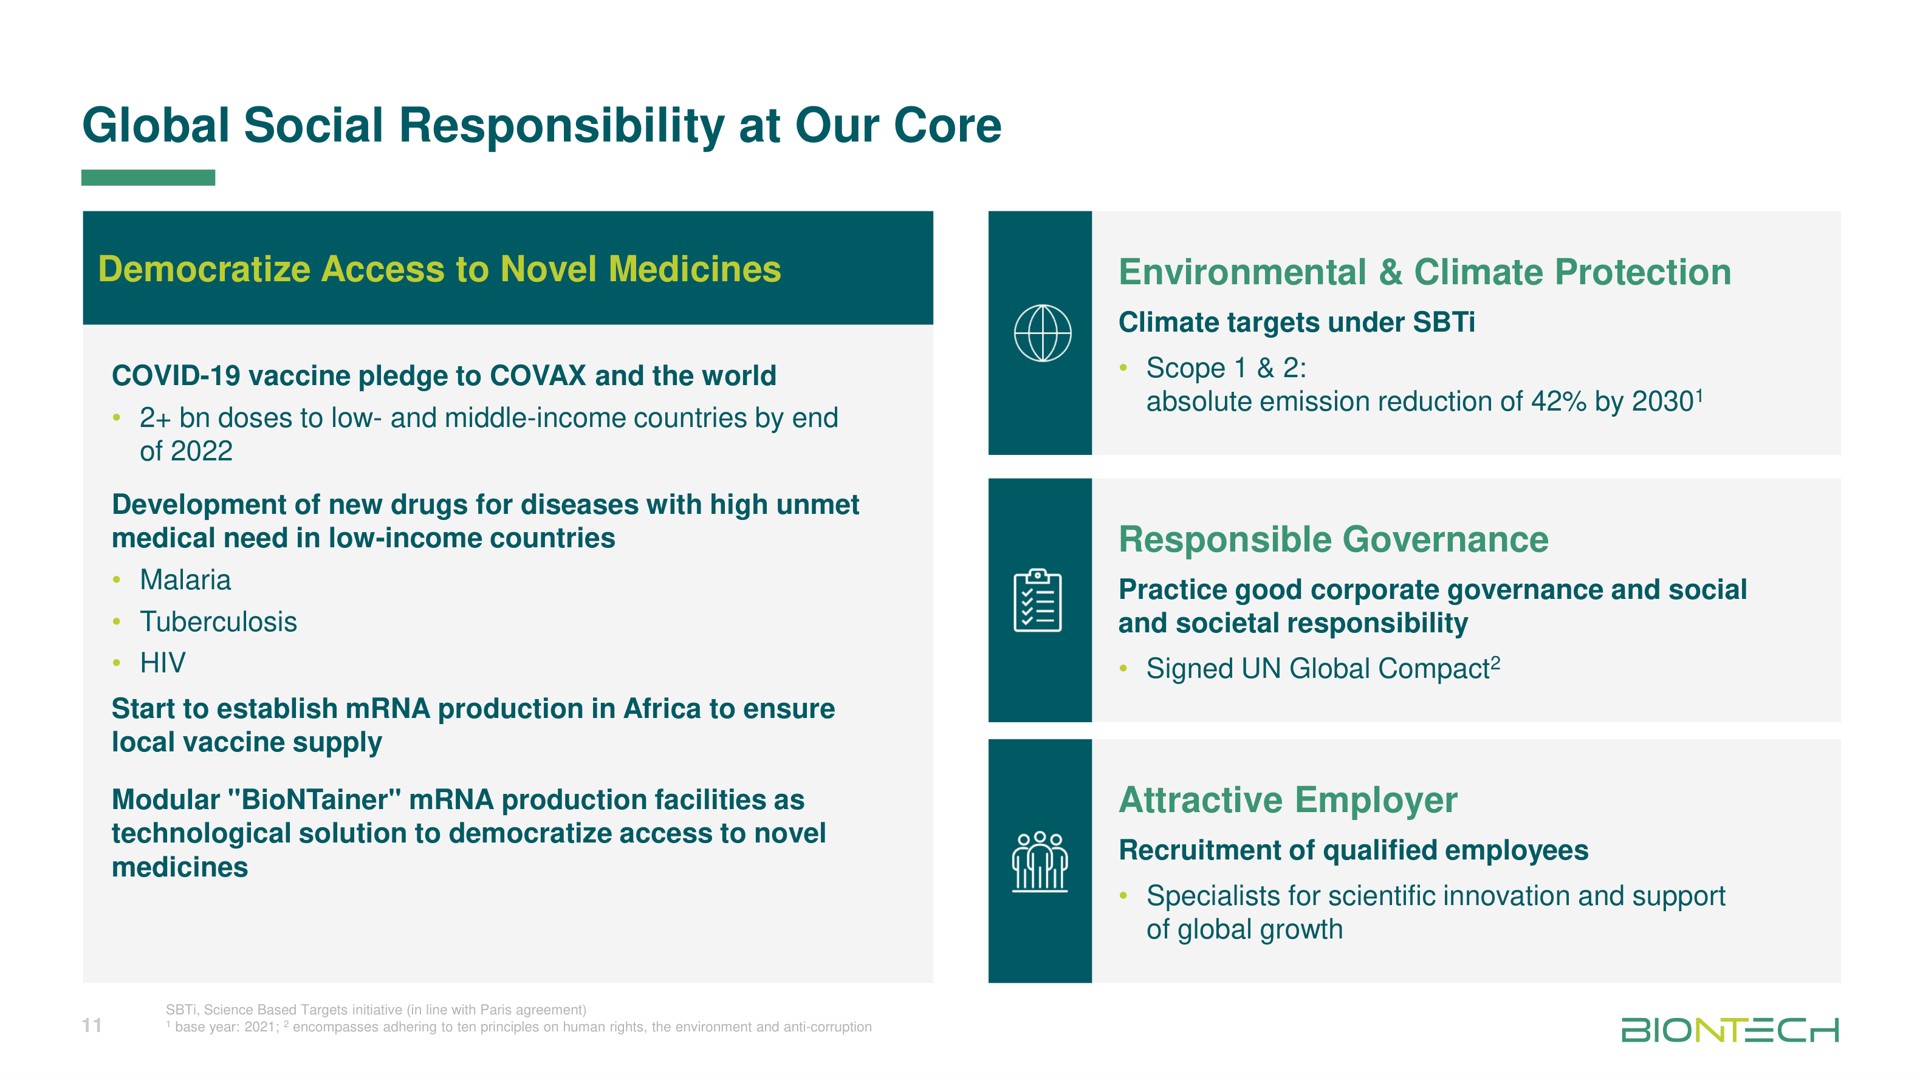 global social responsibility at our core environmental climate protection medical need in low income countries modular production facilities as responsible governance attractive employer | BioNTech